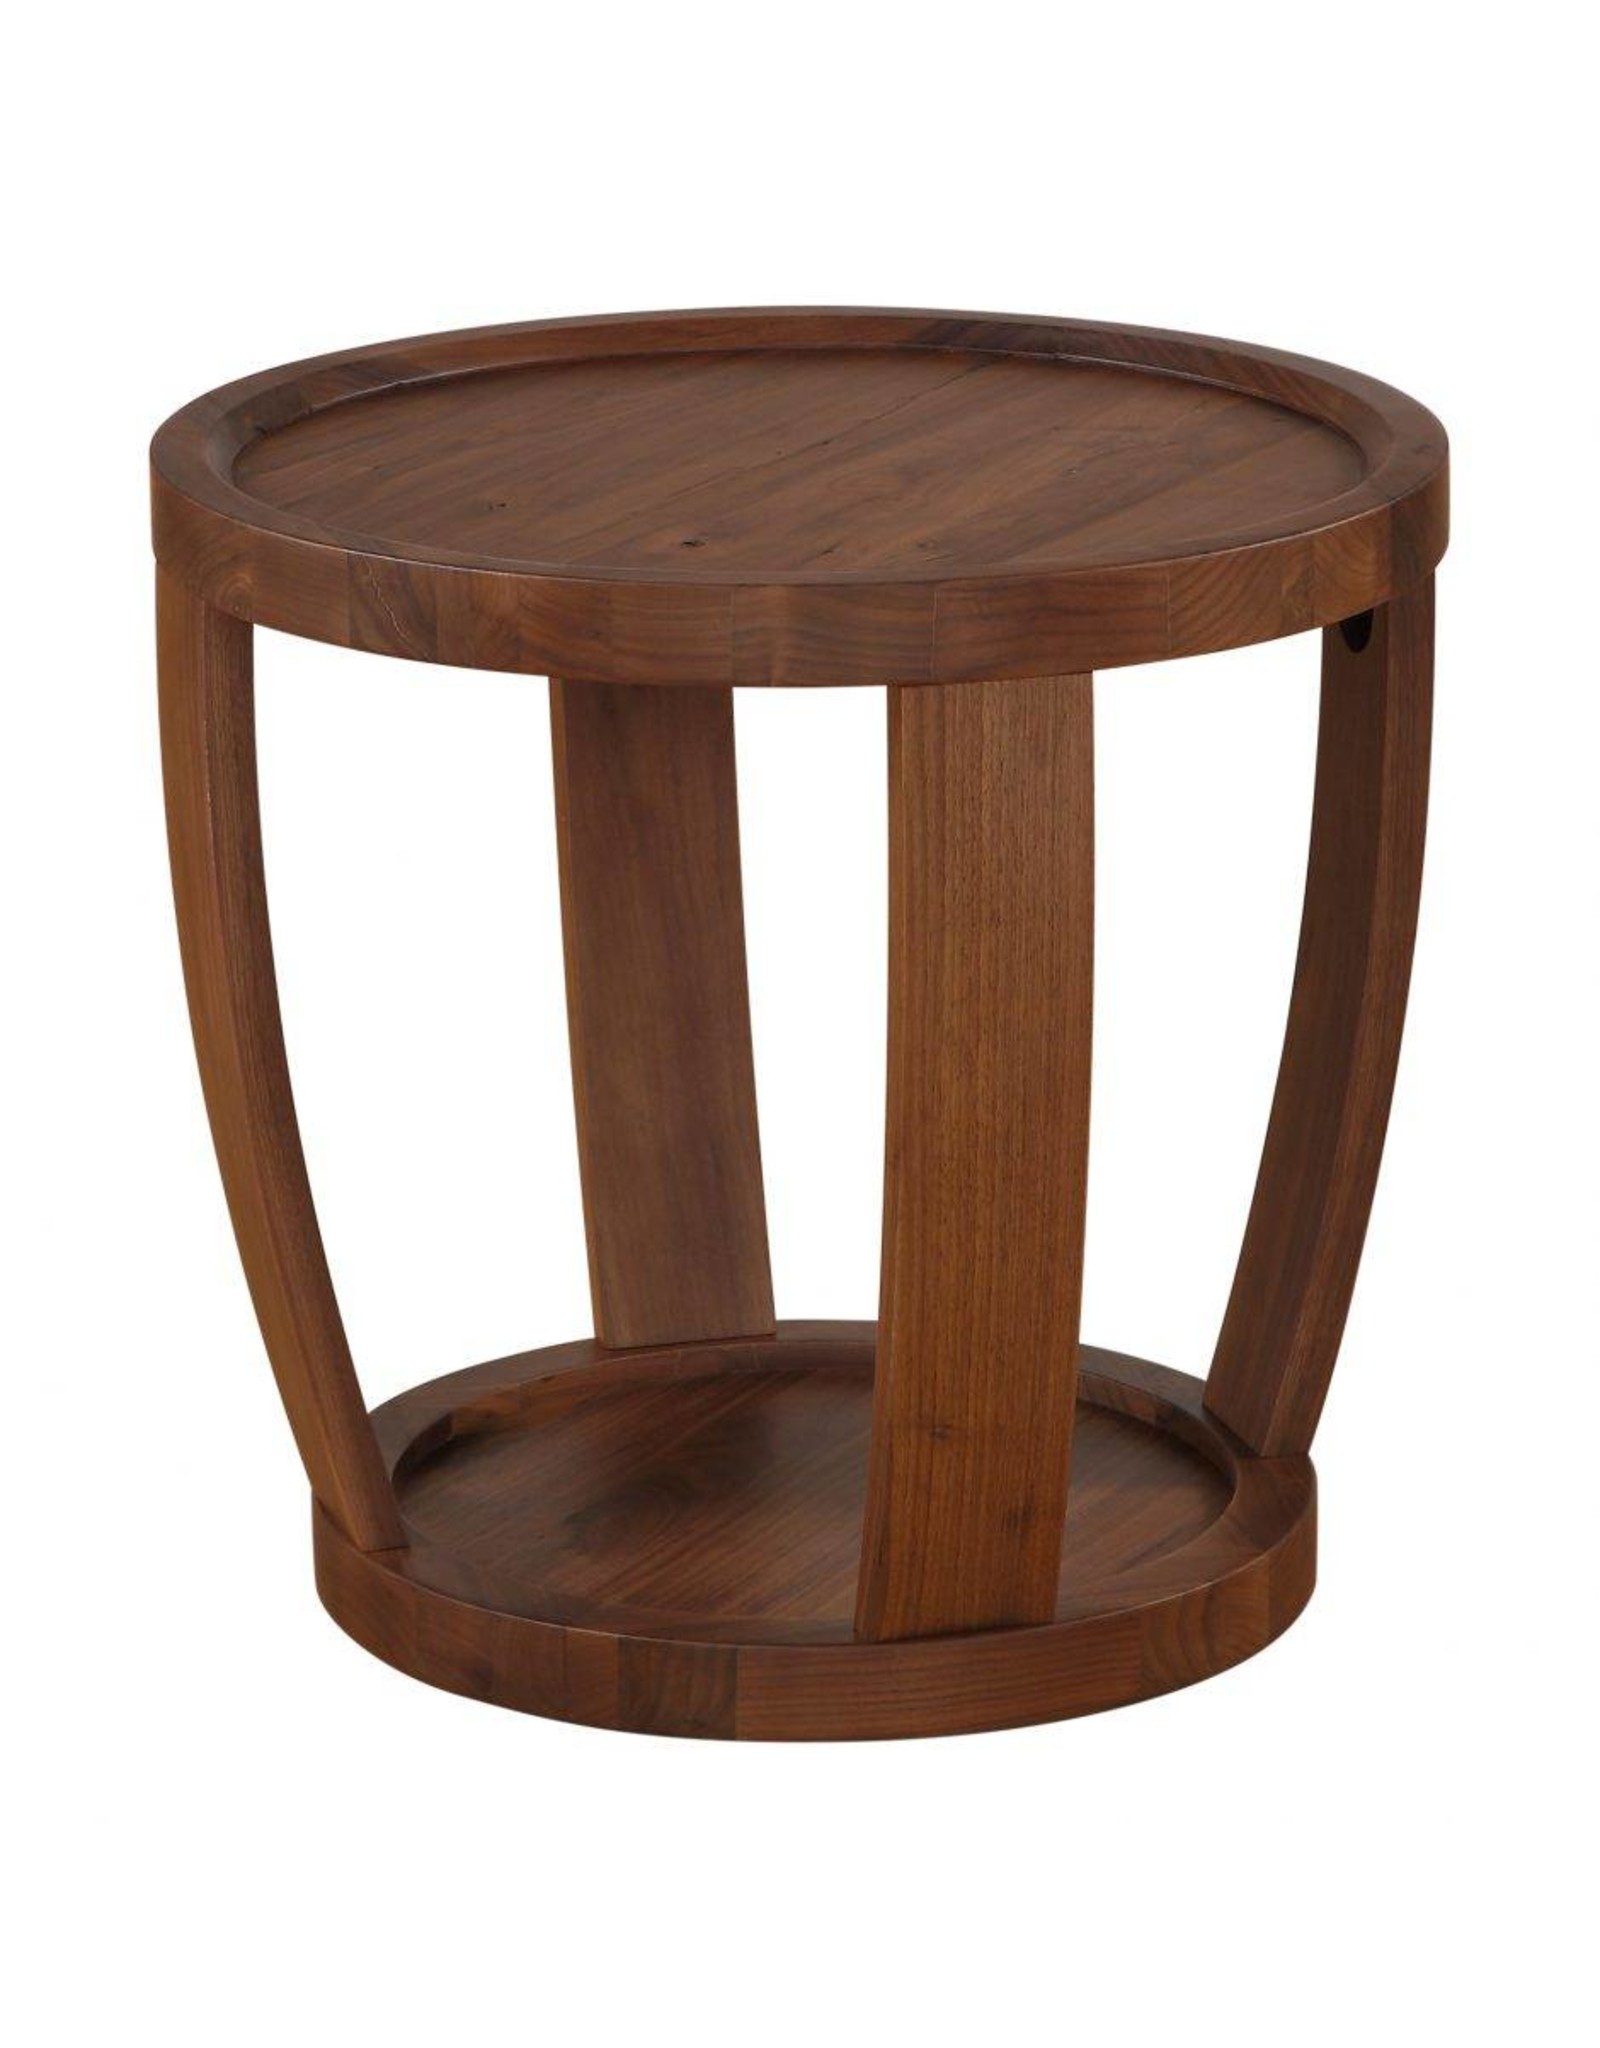 Monroe & Kent DYLAN ROUND END TABLE RUSTIC WALNUT